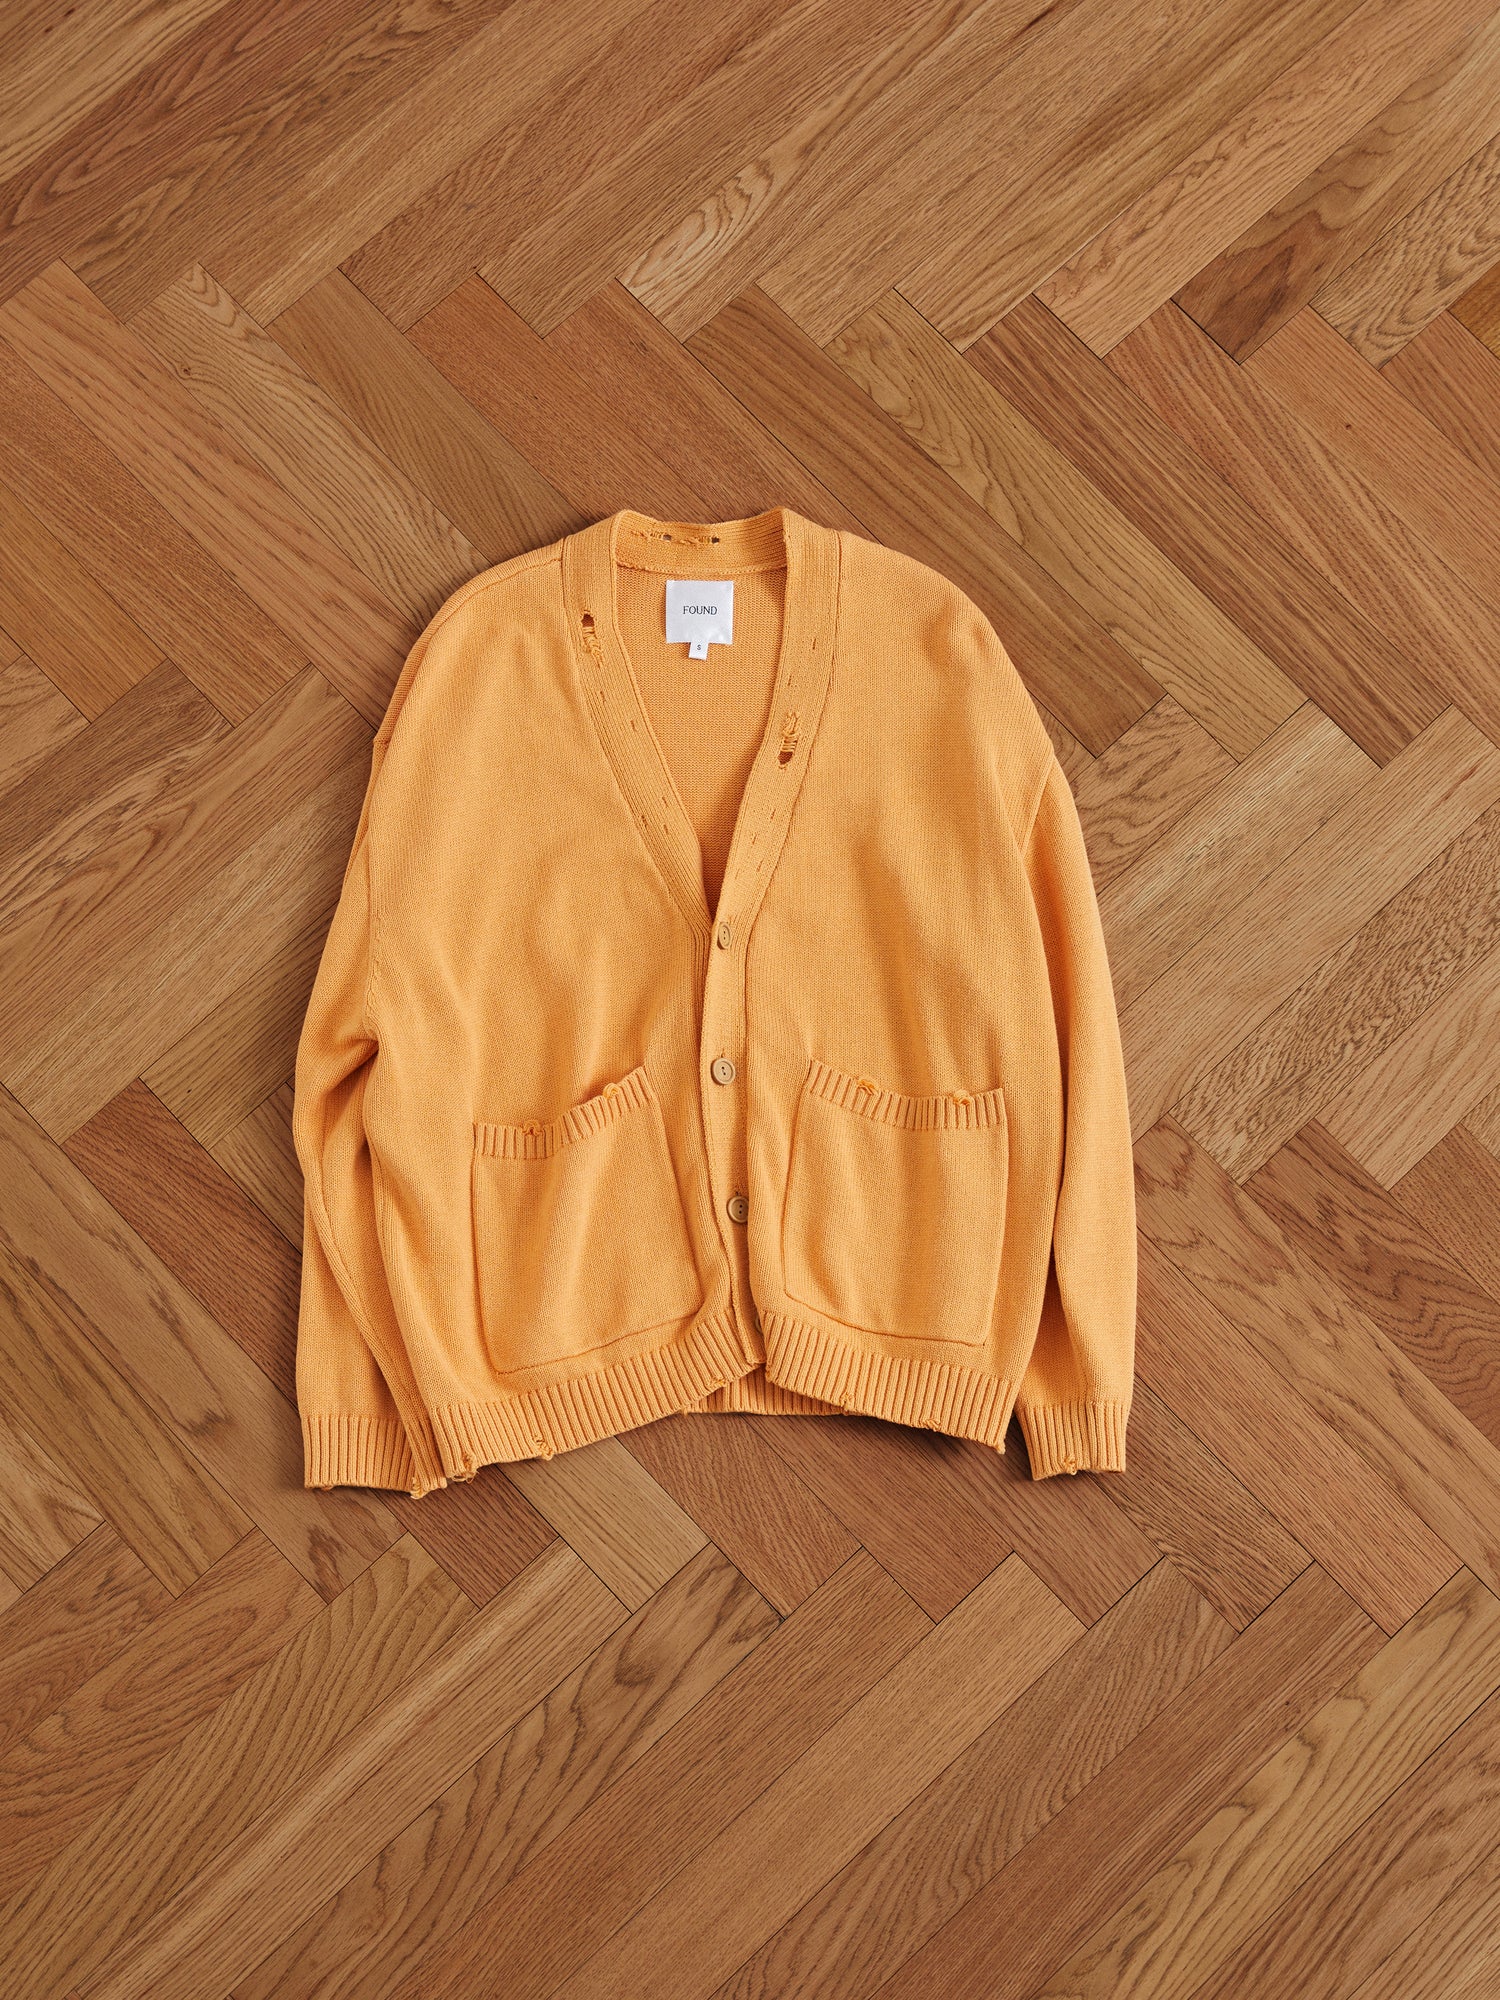 A Cadmium Distressed Cardigan sweater resting on a distressed wooden floor.